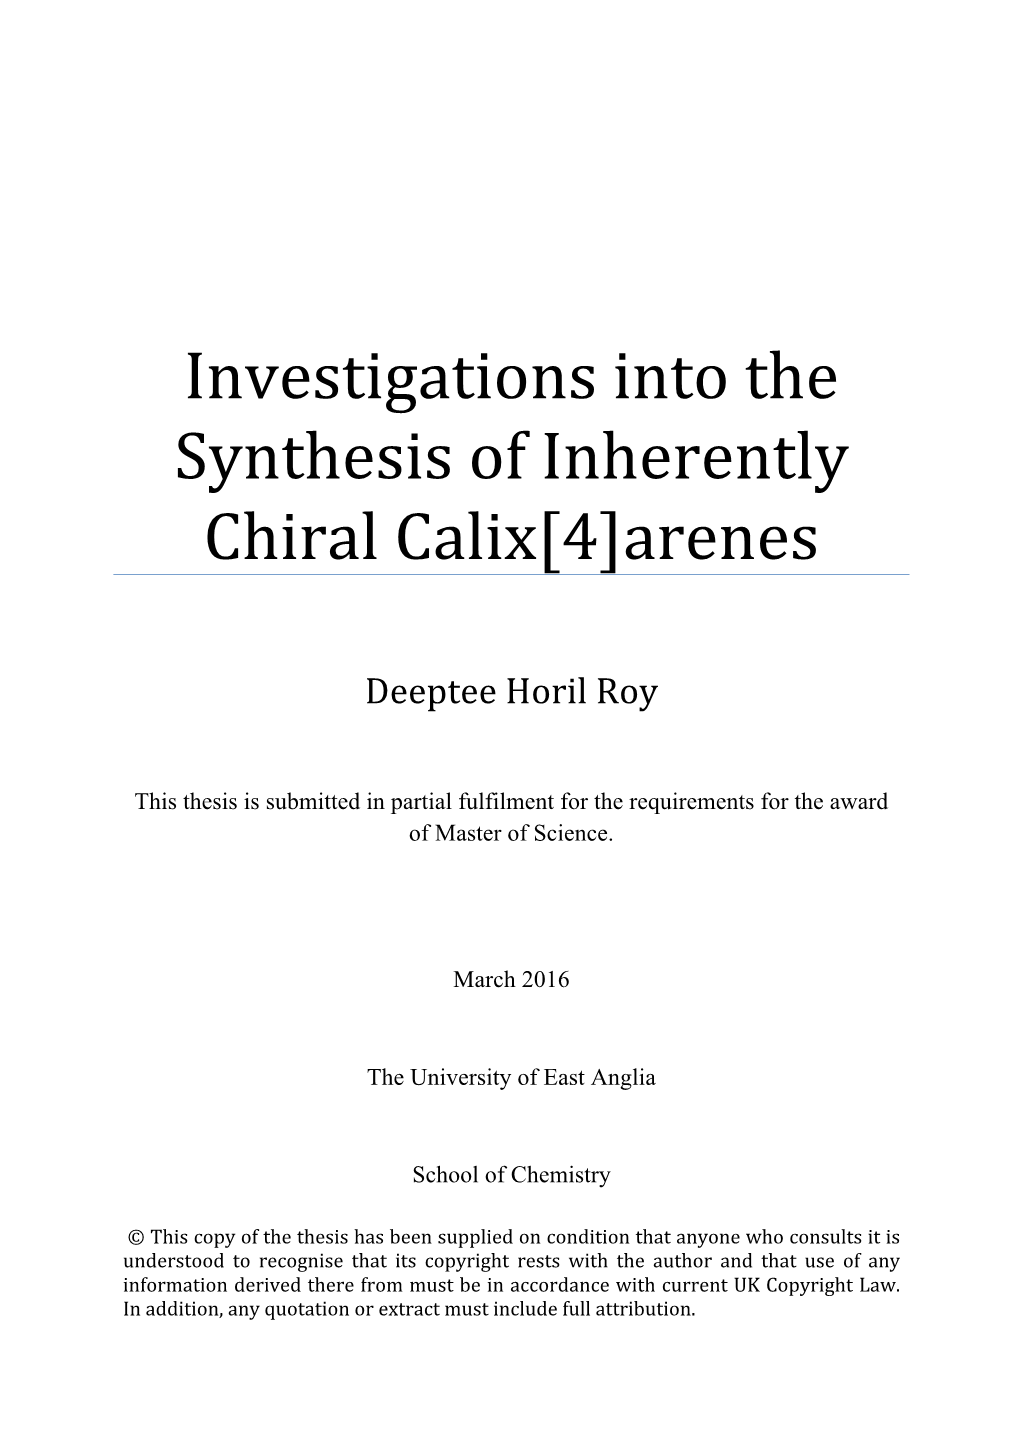 Investigations Into the Synthesis of Inherently Chiral Calix[4]Arenes